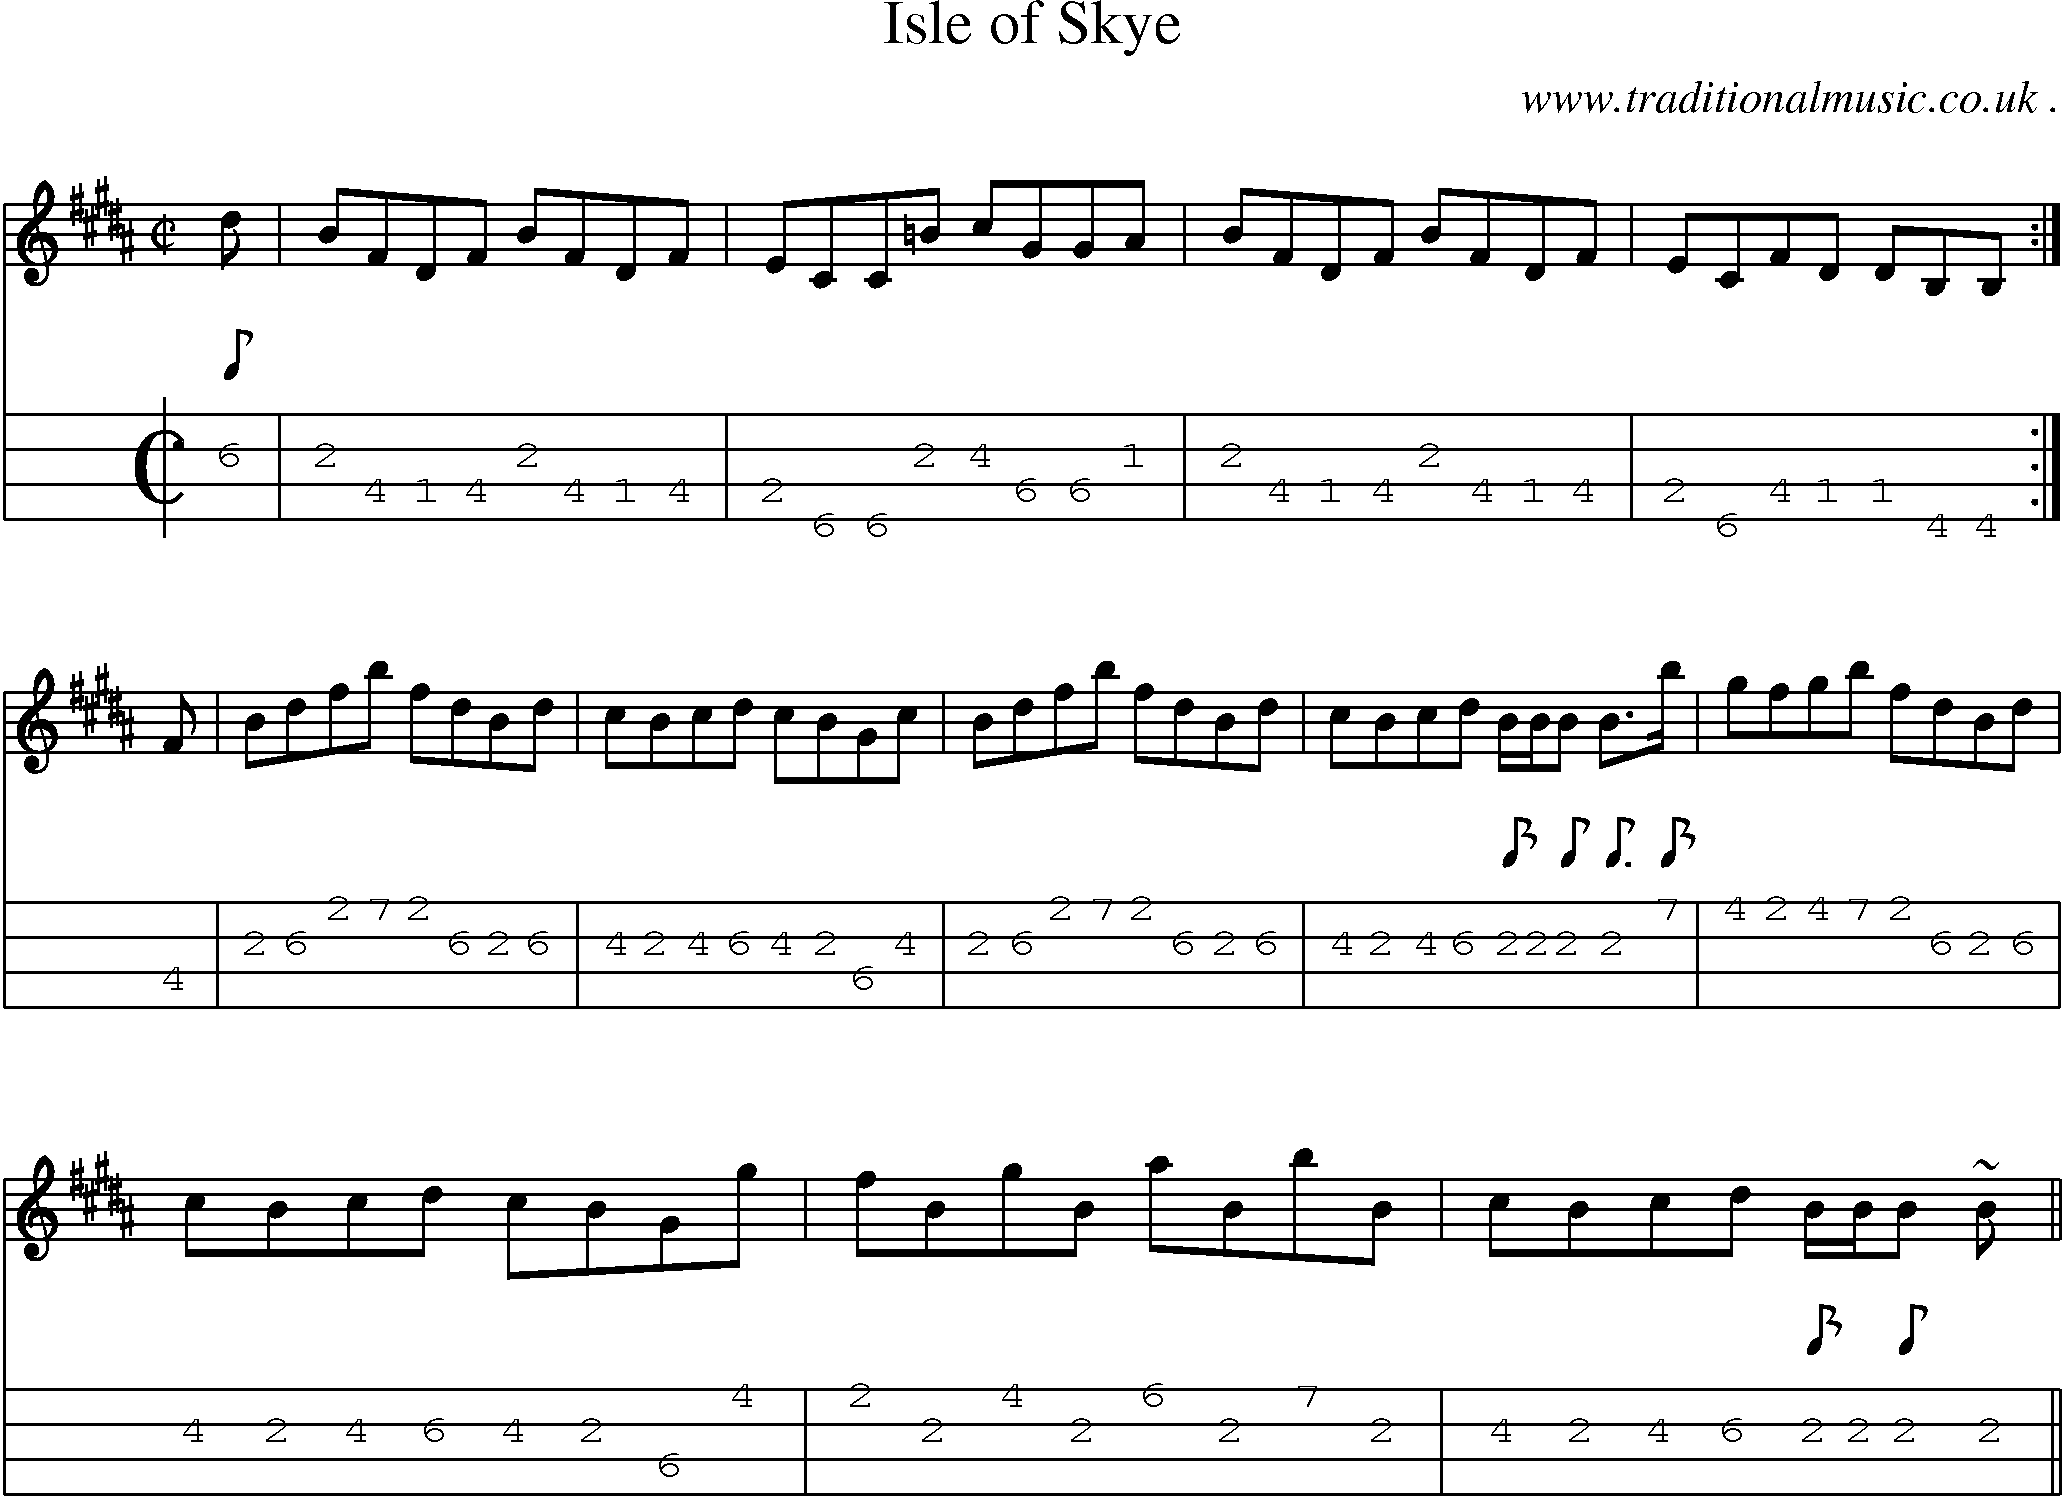 Sheet-music  score, Chords and Mandolin Tabs for Isle Of Skye 